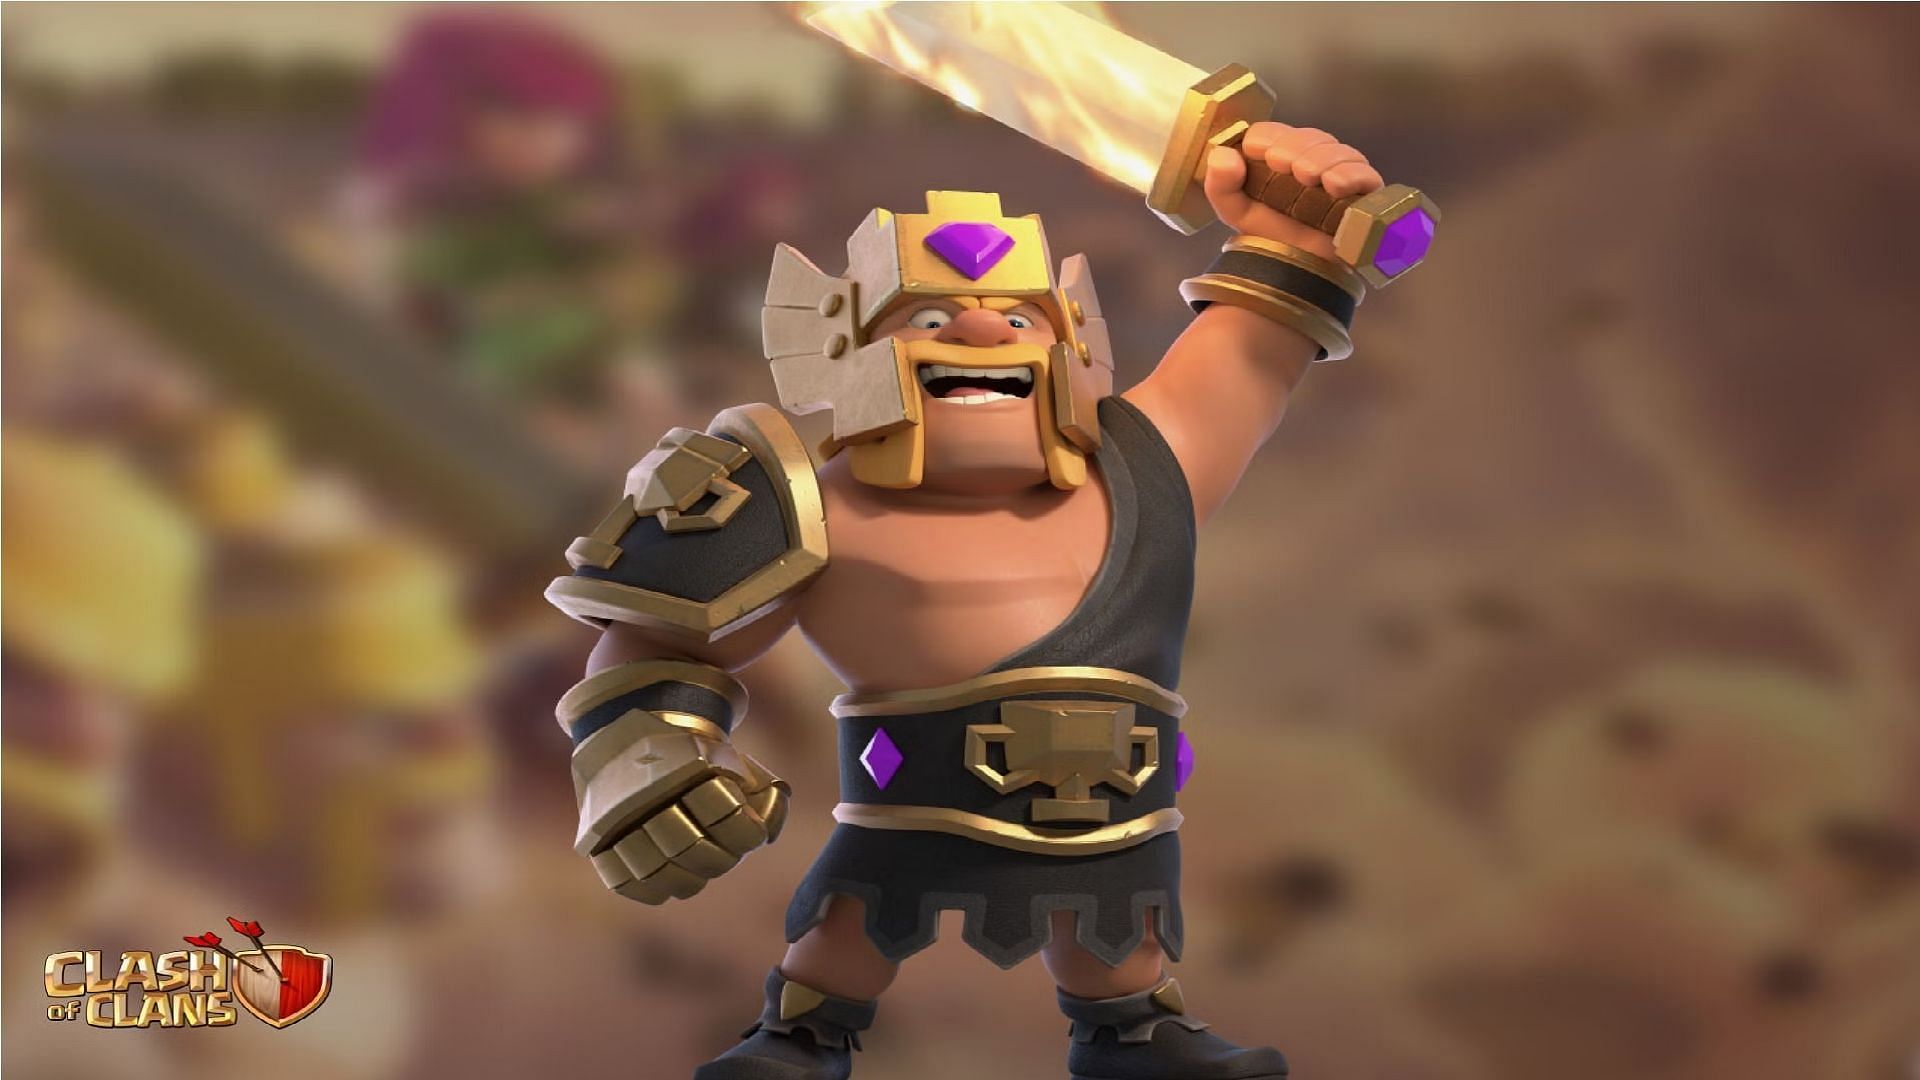 Barbarian King will have new Equipment in the upcoming Clash with Haaland event (Image via Supercell)